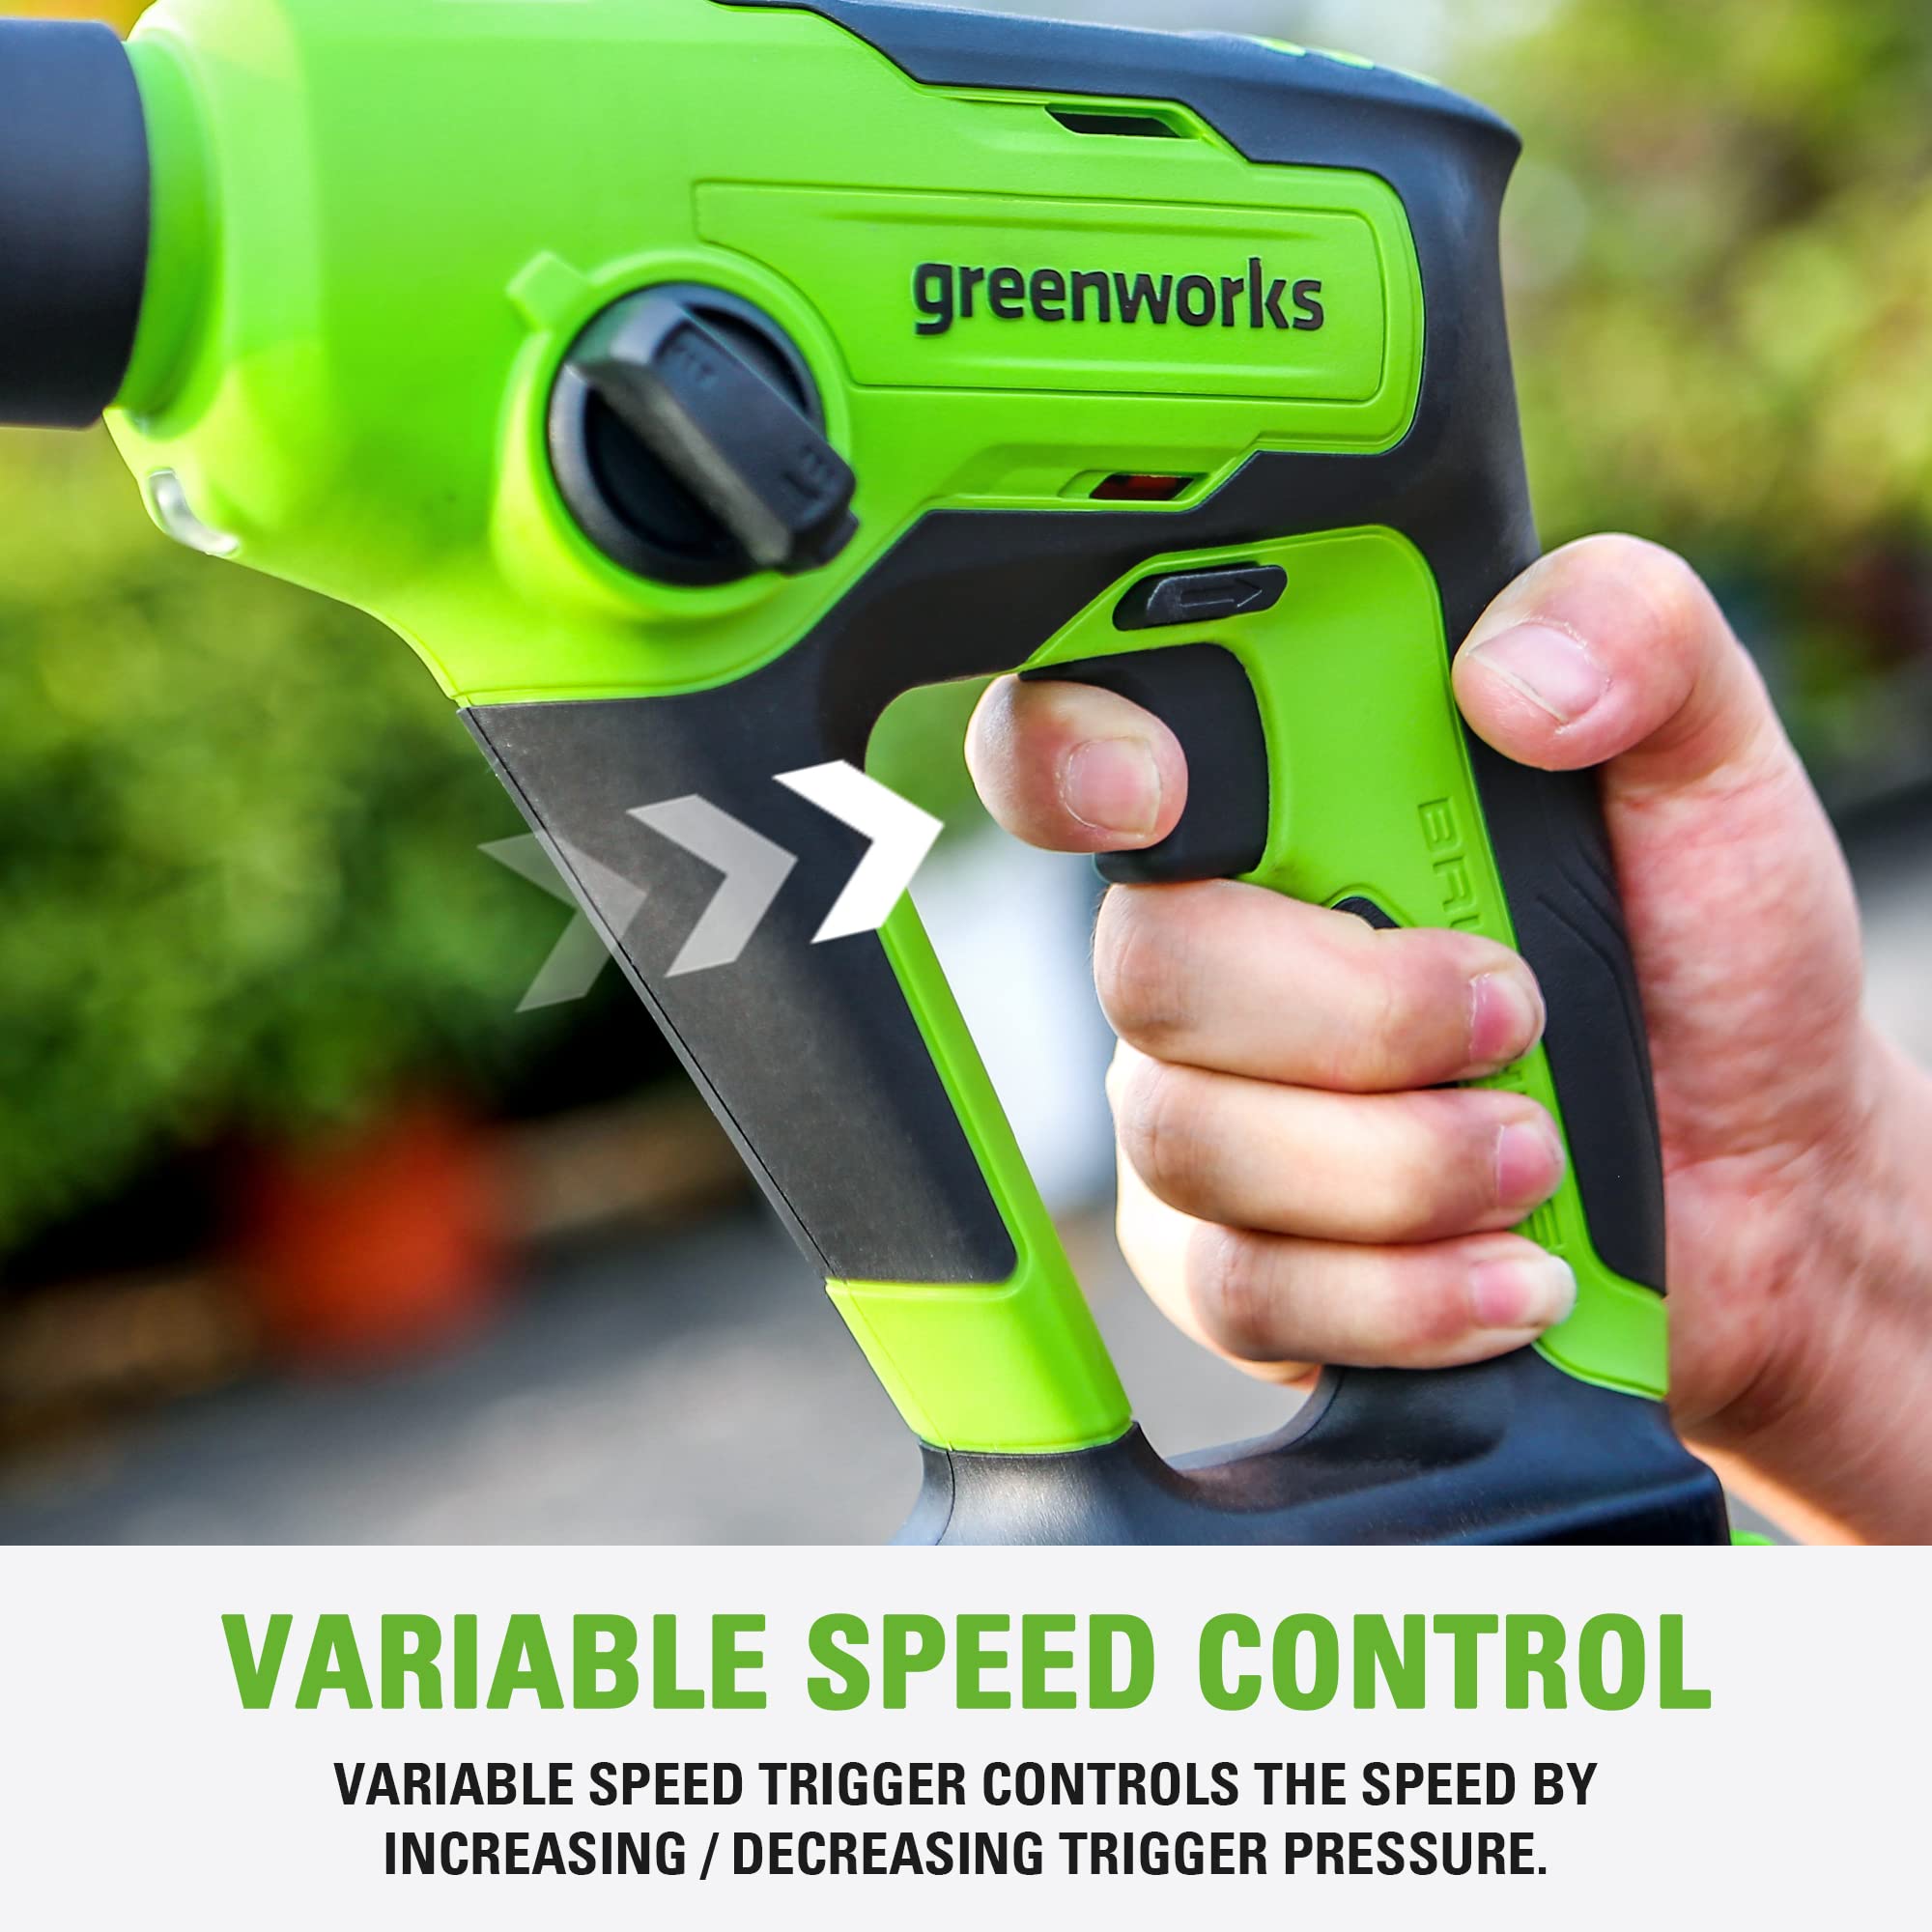 Greenworks 24V Brushless Cordless Heavy Duty Rotary Hammer Drill, Impact Energy 1.2 Joules, SDS-Plus, Tool Only